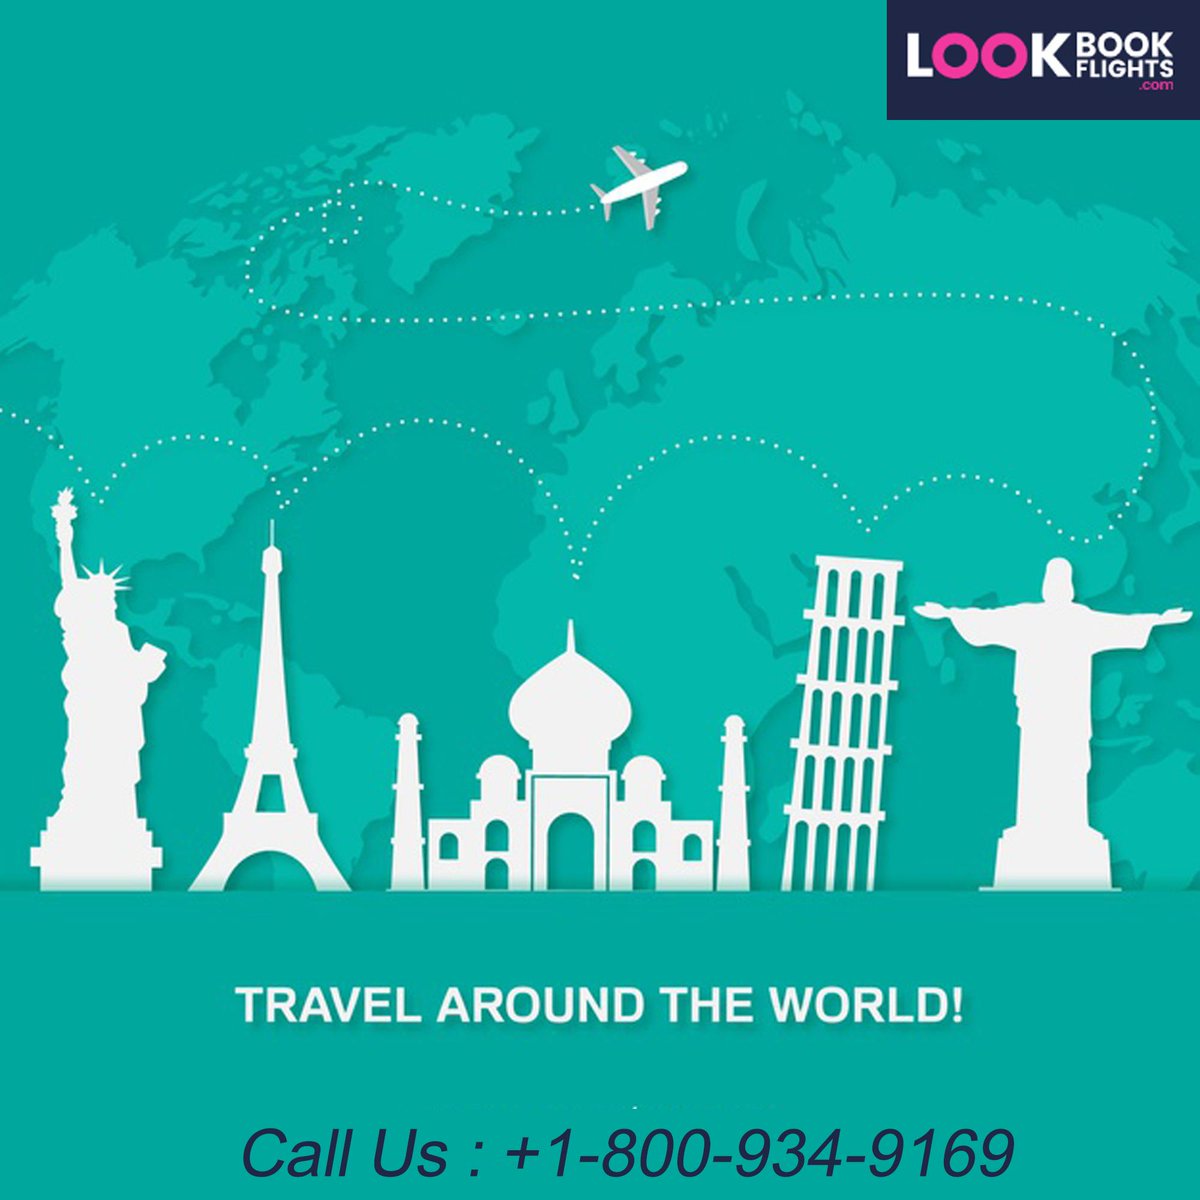 Want to book online flights for #US but not sure from where then visit lookbookflights.com to compare exclusive deals and to choose best one as per your need.
#travel #FlightDeal #CheapFlight #FlightDiscount #TravelDeal #travelagent #TravelOffer ##CheapFlightTickets #flights